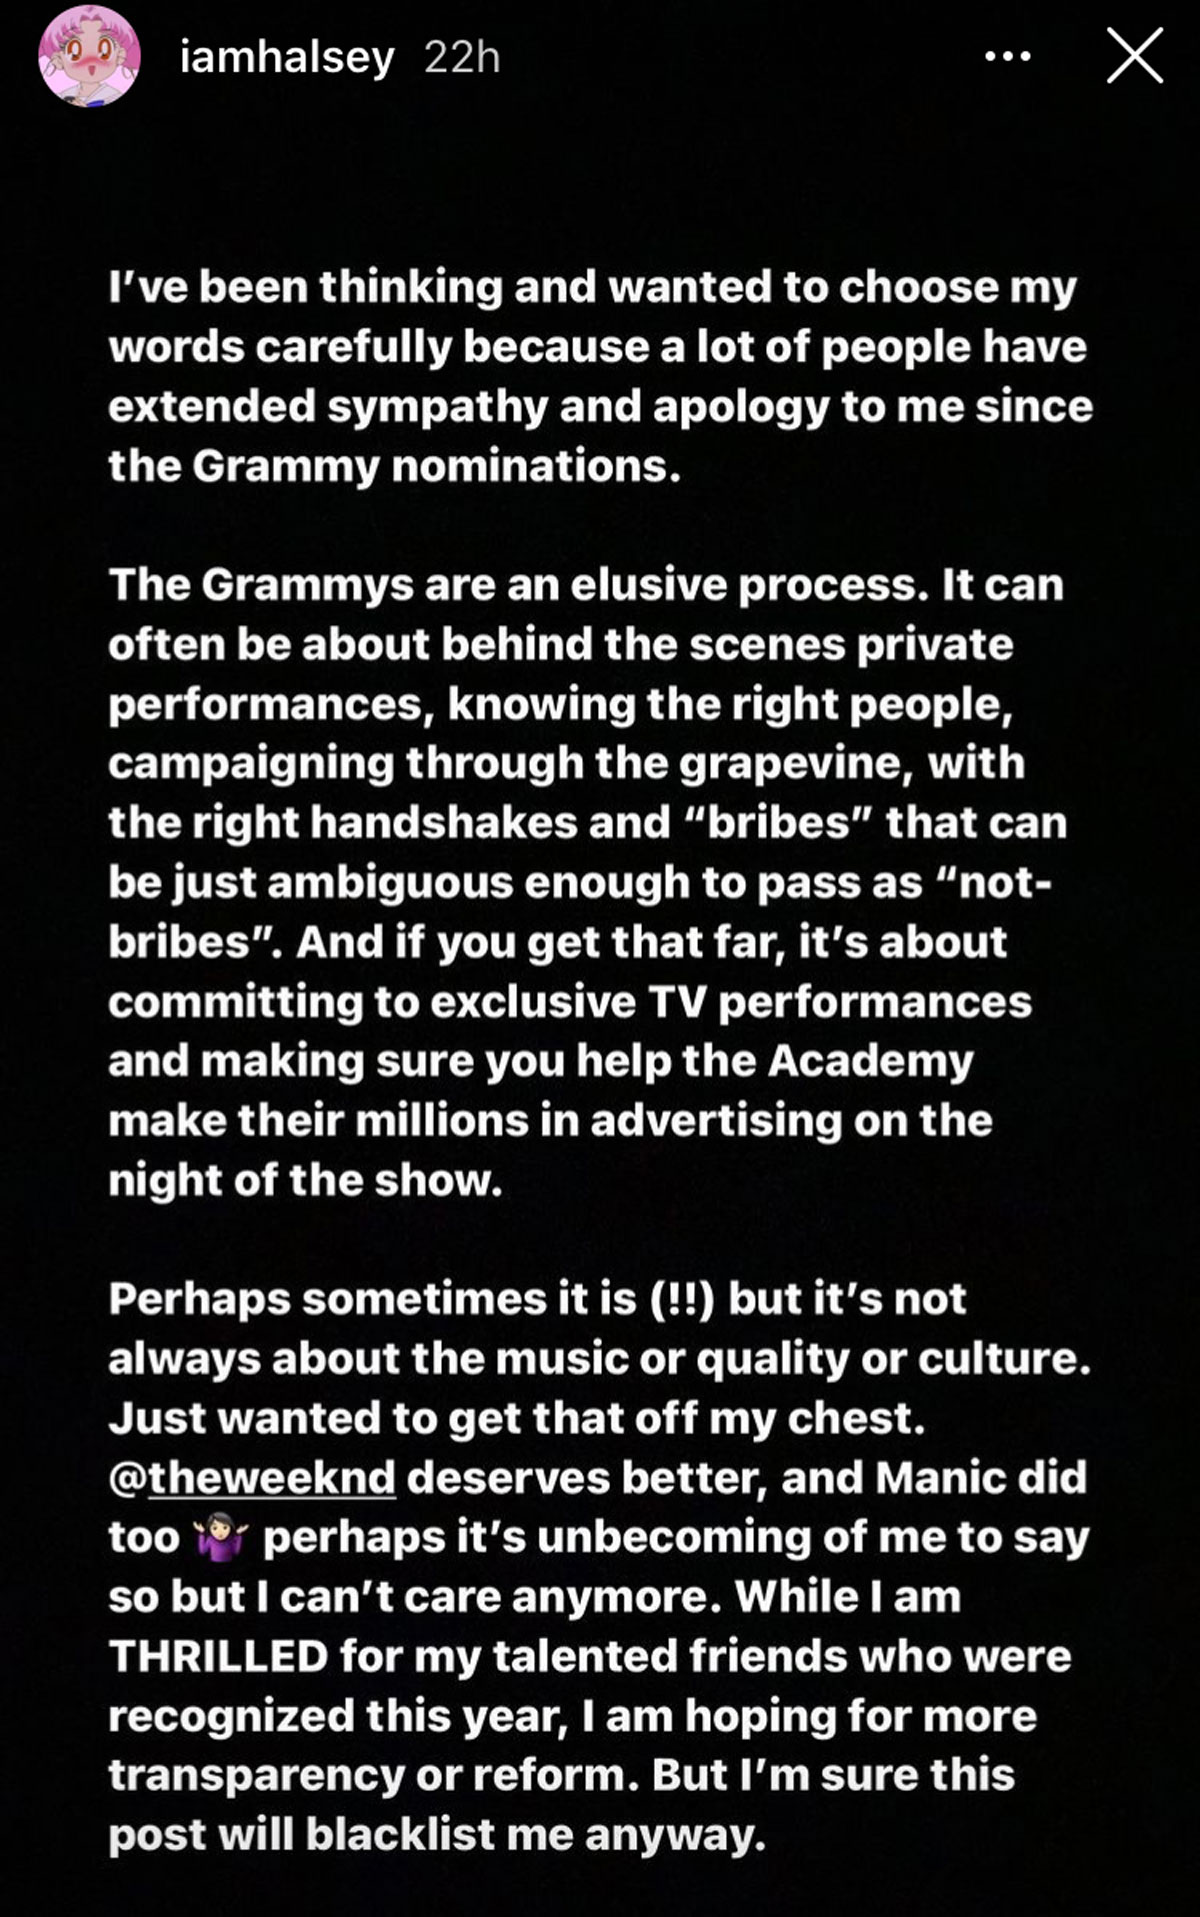 Halsey calls out the Grammys over her nomination snub, accuses them of holding bribes at play!